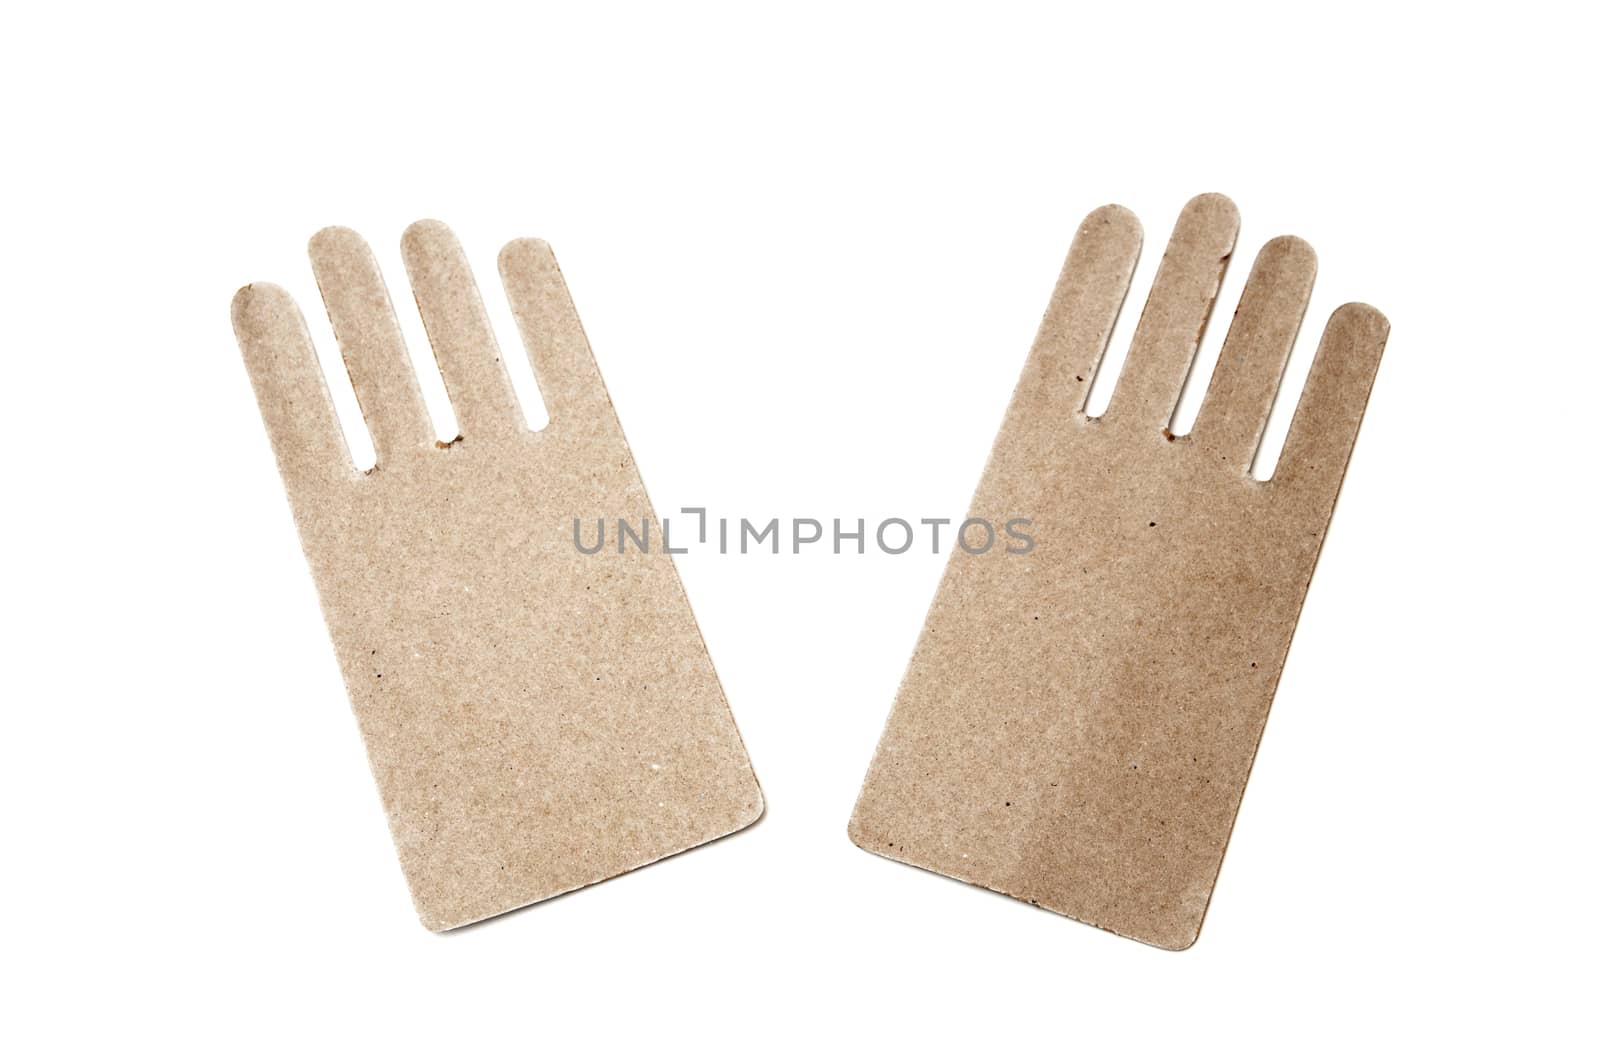 cardboard hands on a white background